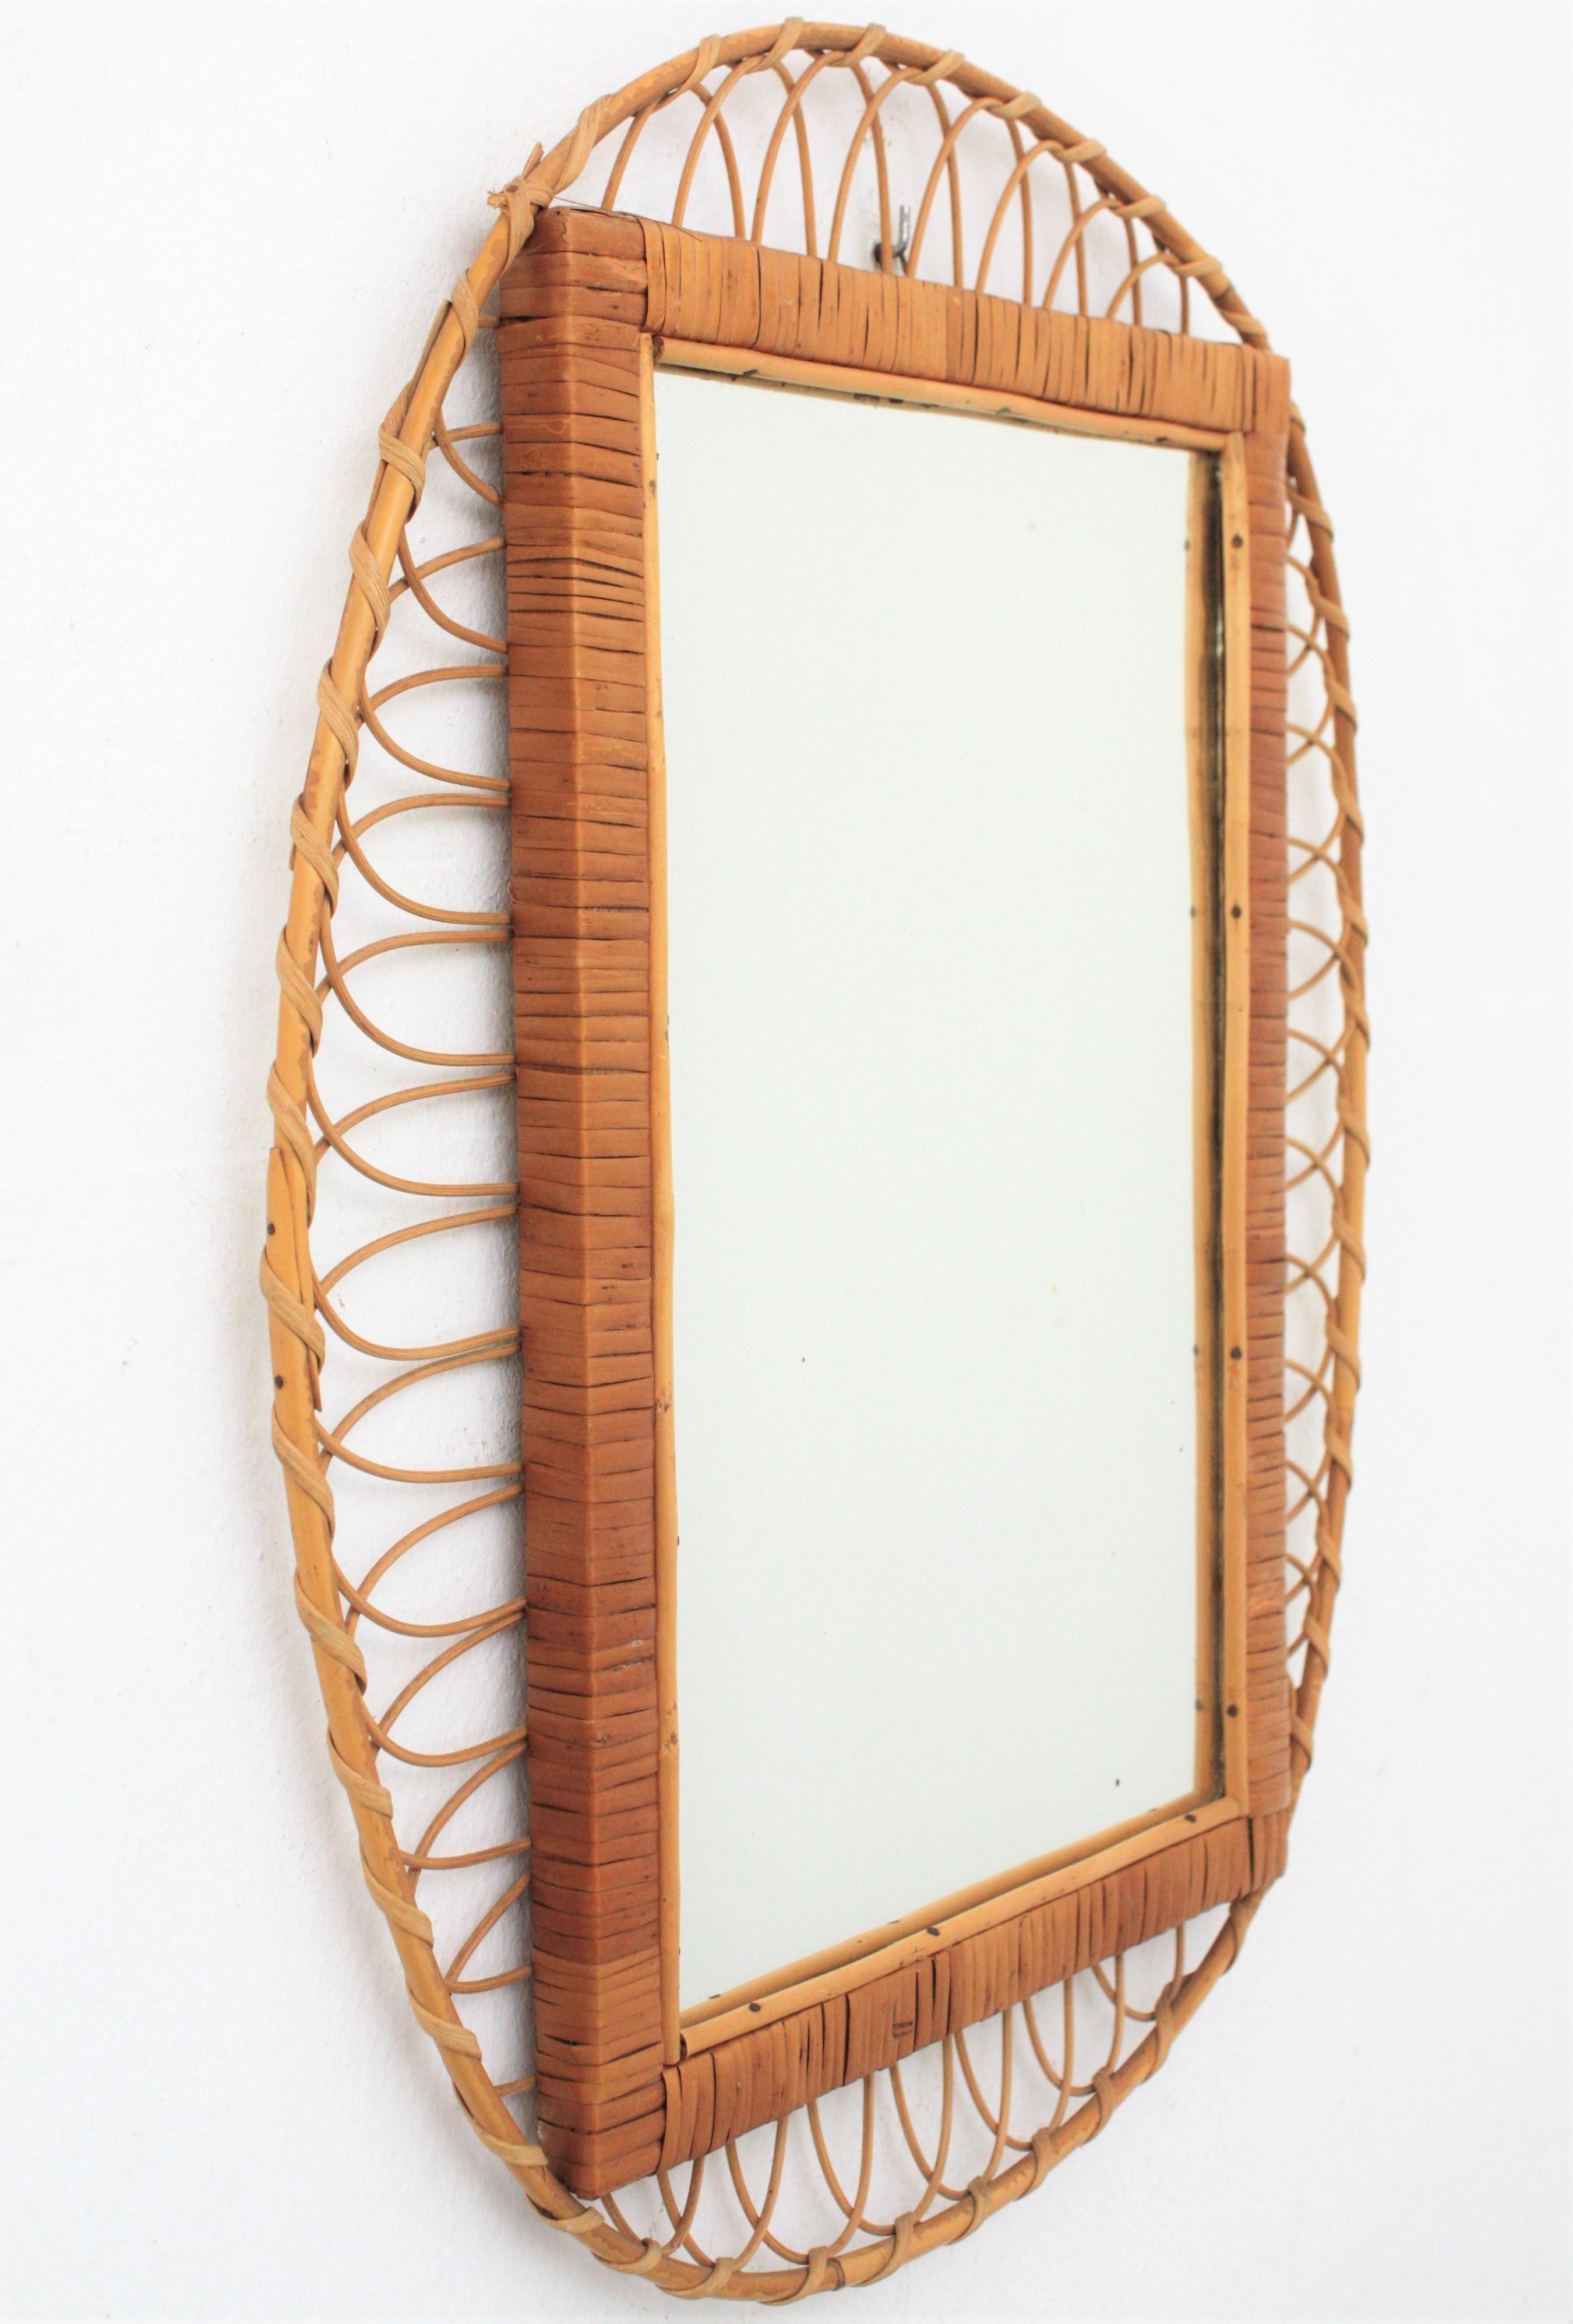 Hand-Crafted French Rattan Oval Mirror with Woven Rectangular Frame, 1960s For Sale